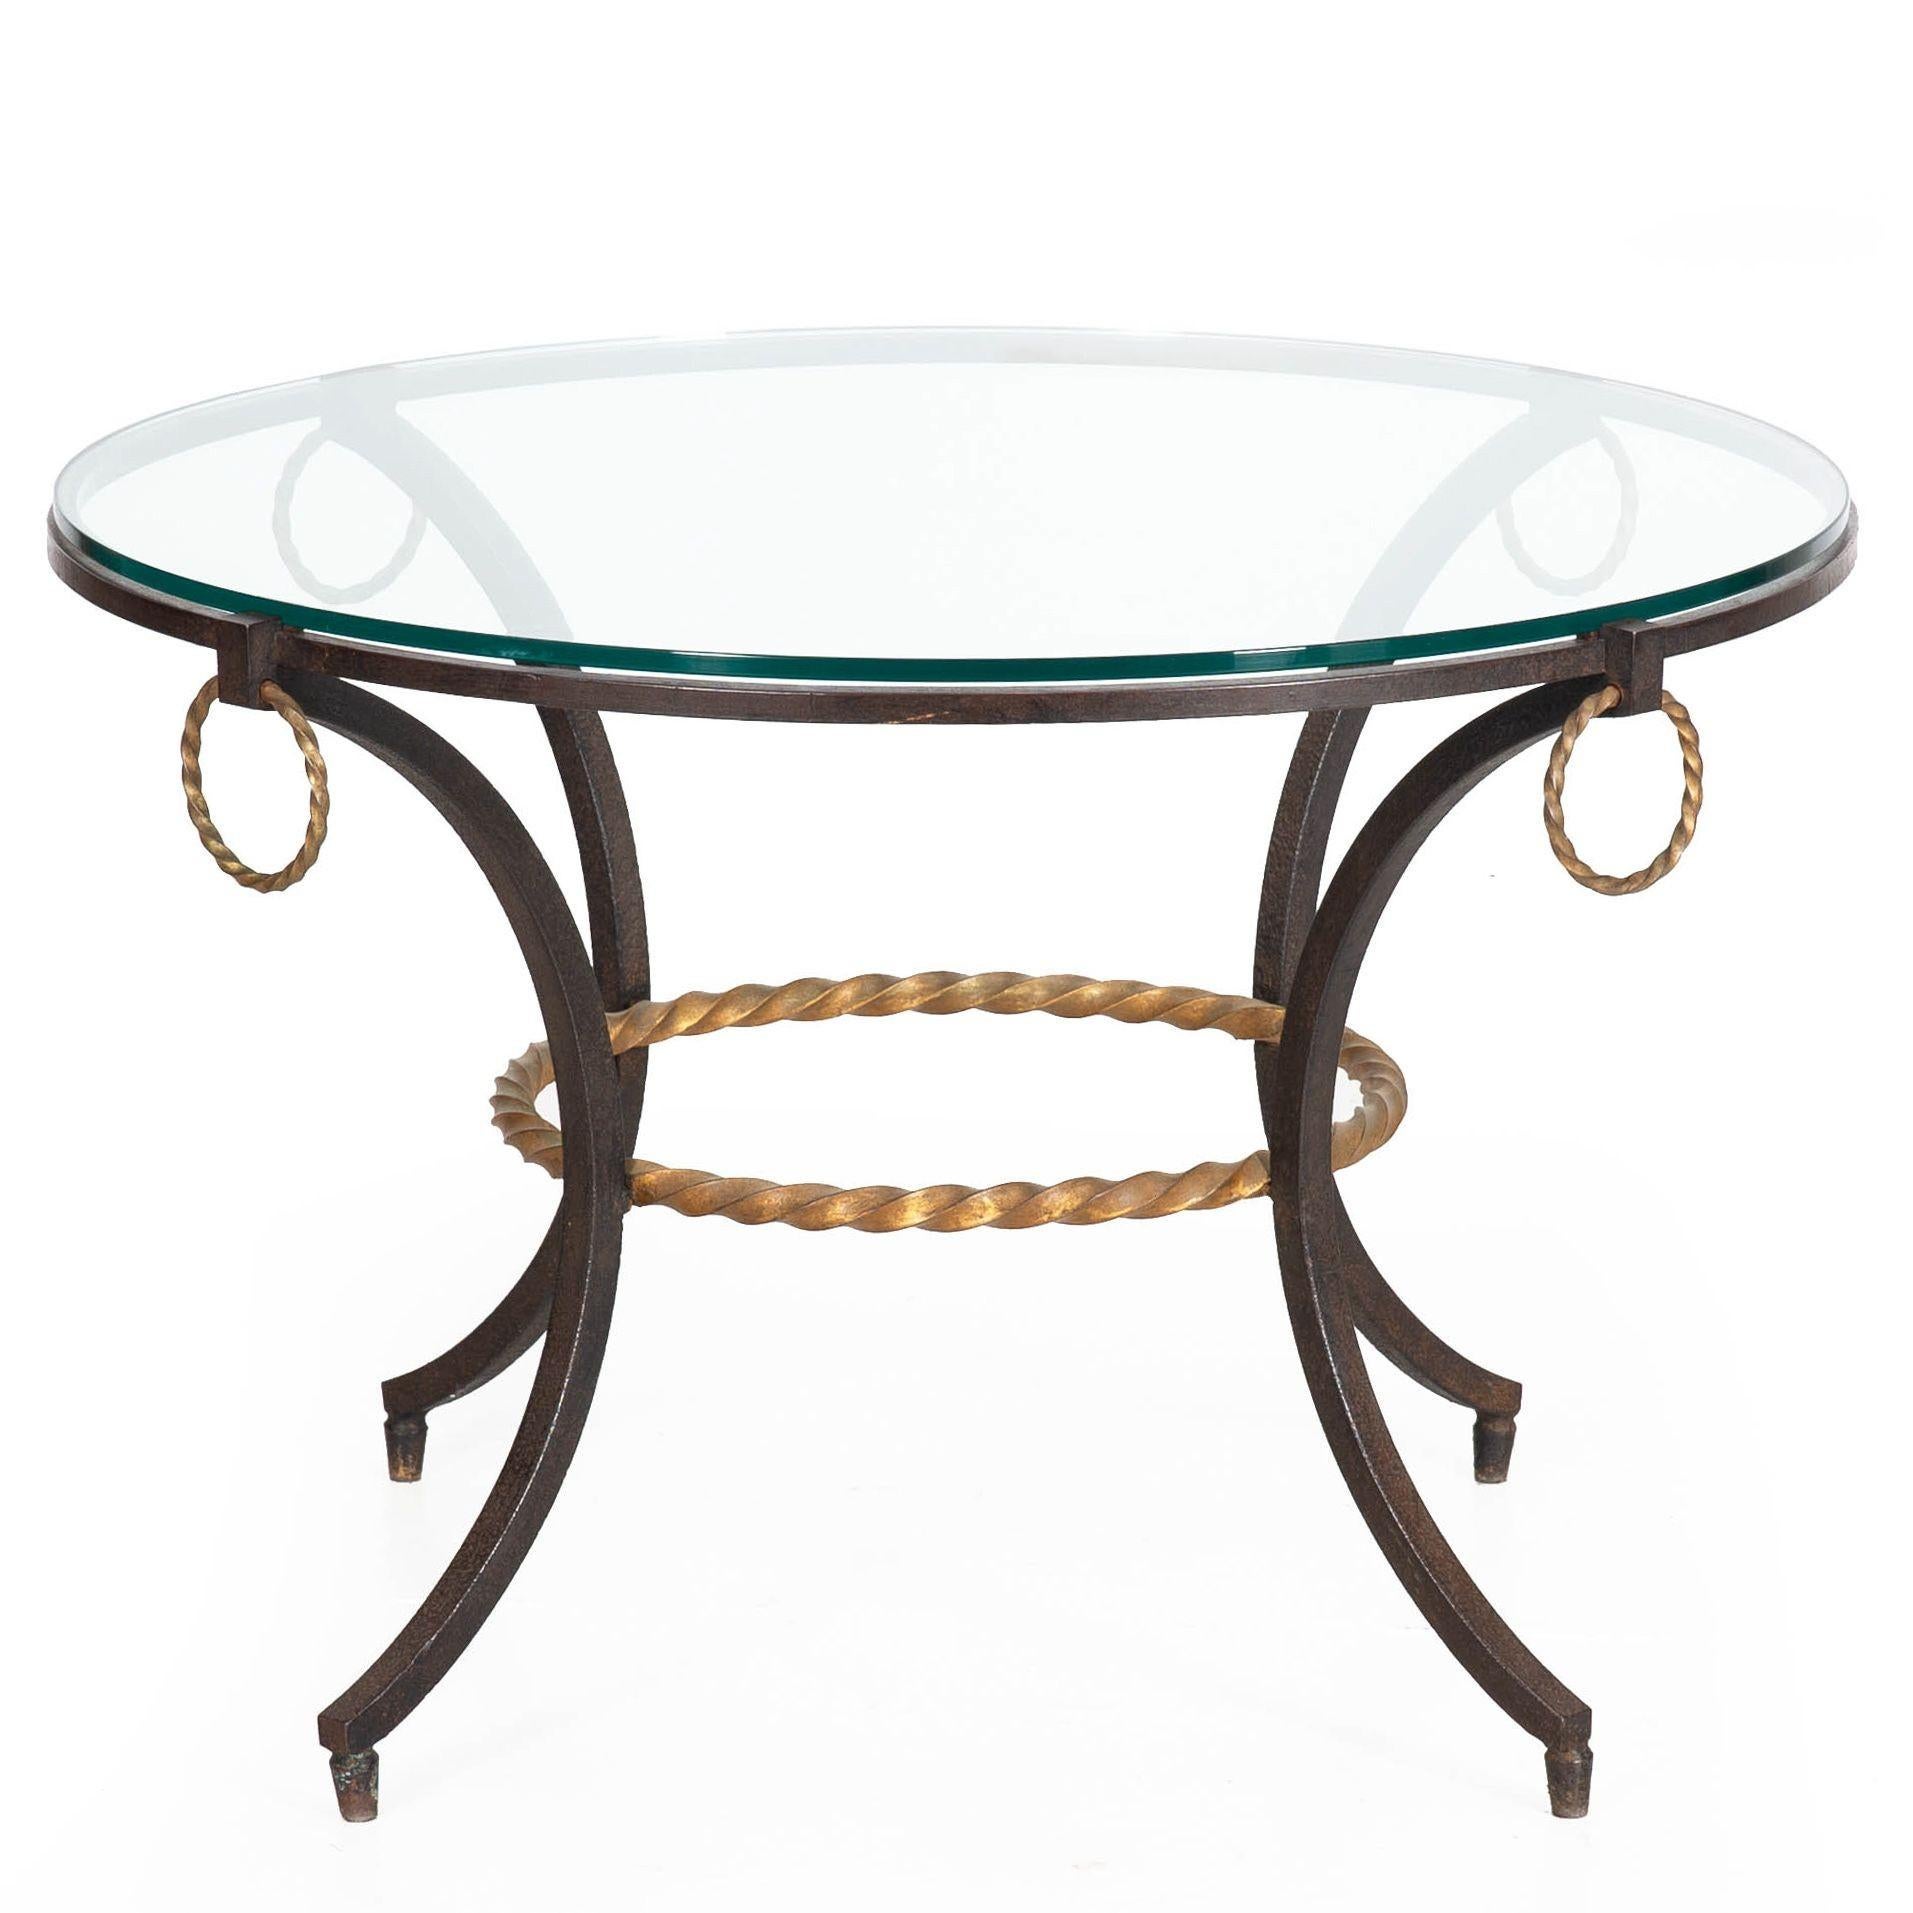 MODERNIST PATINATED WROUGHT-IRON AND GLASS COFFEE TABLE
French, circa 1950s  unmarked
Item # 401RGG02P-2

A captivating modernist table from the 1950s, this piece is versatile, ideal as either a side table next to a low sofa or chair, or as a coffee